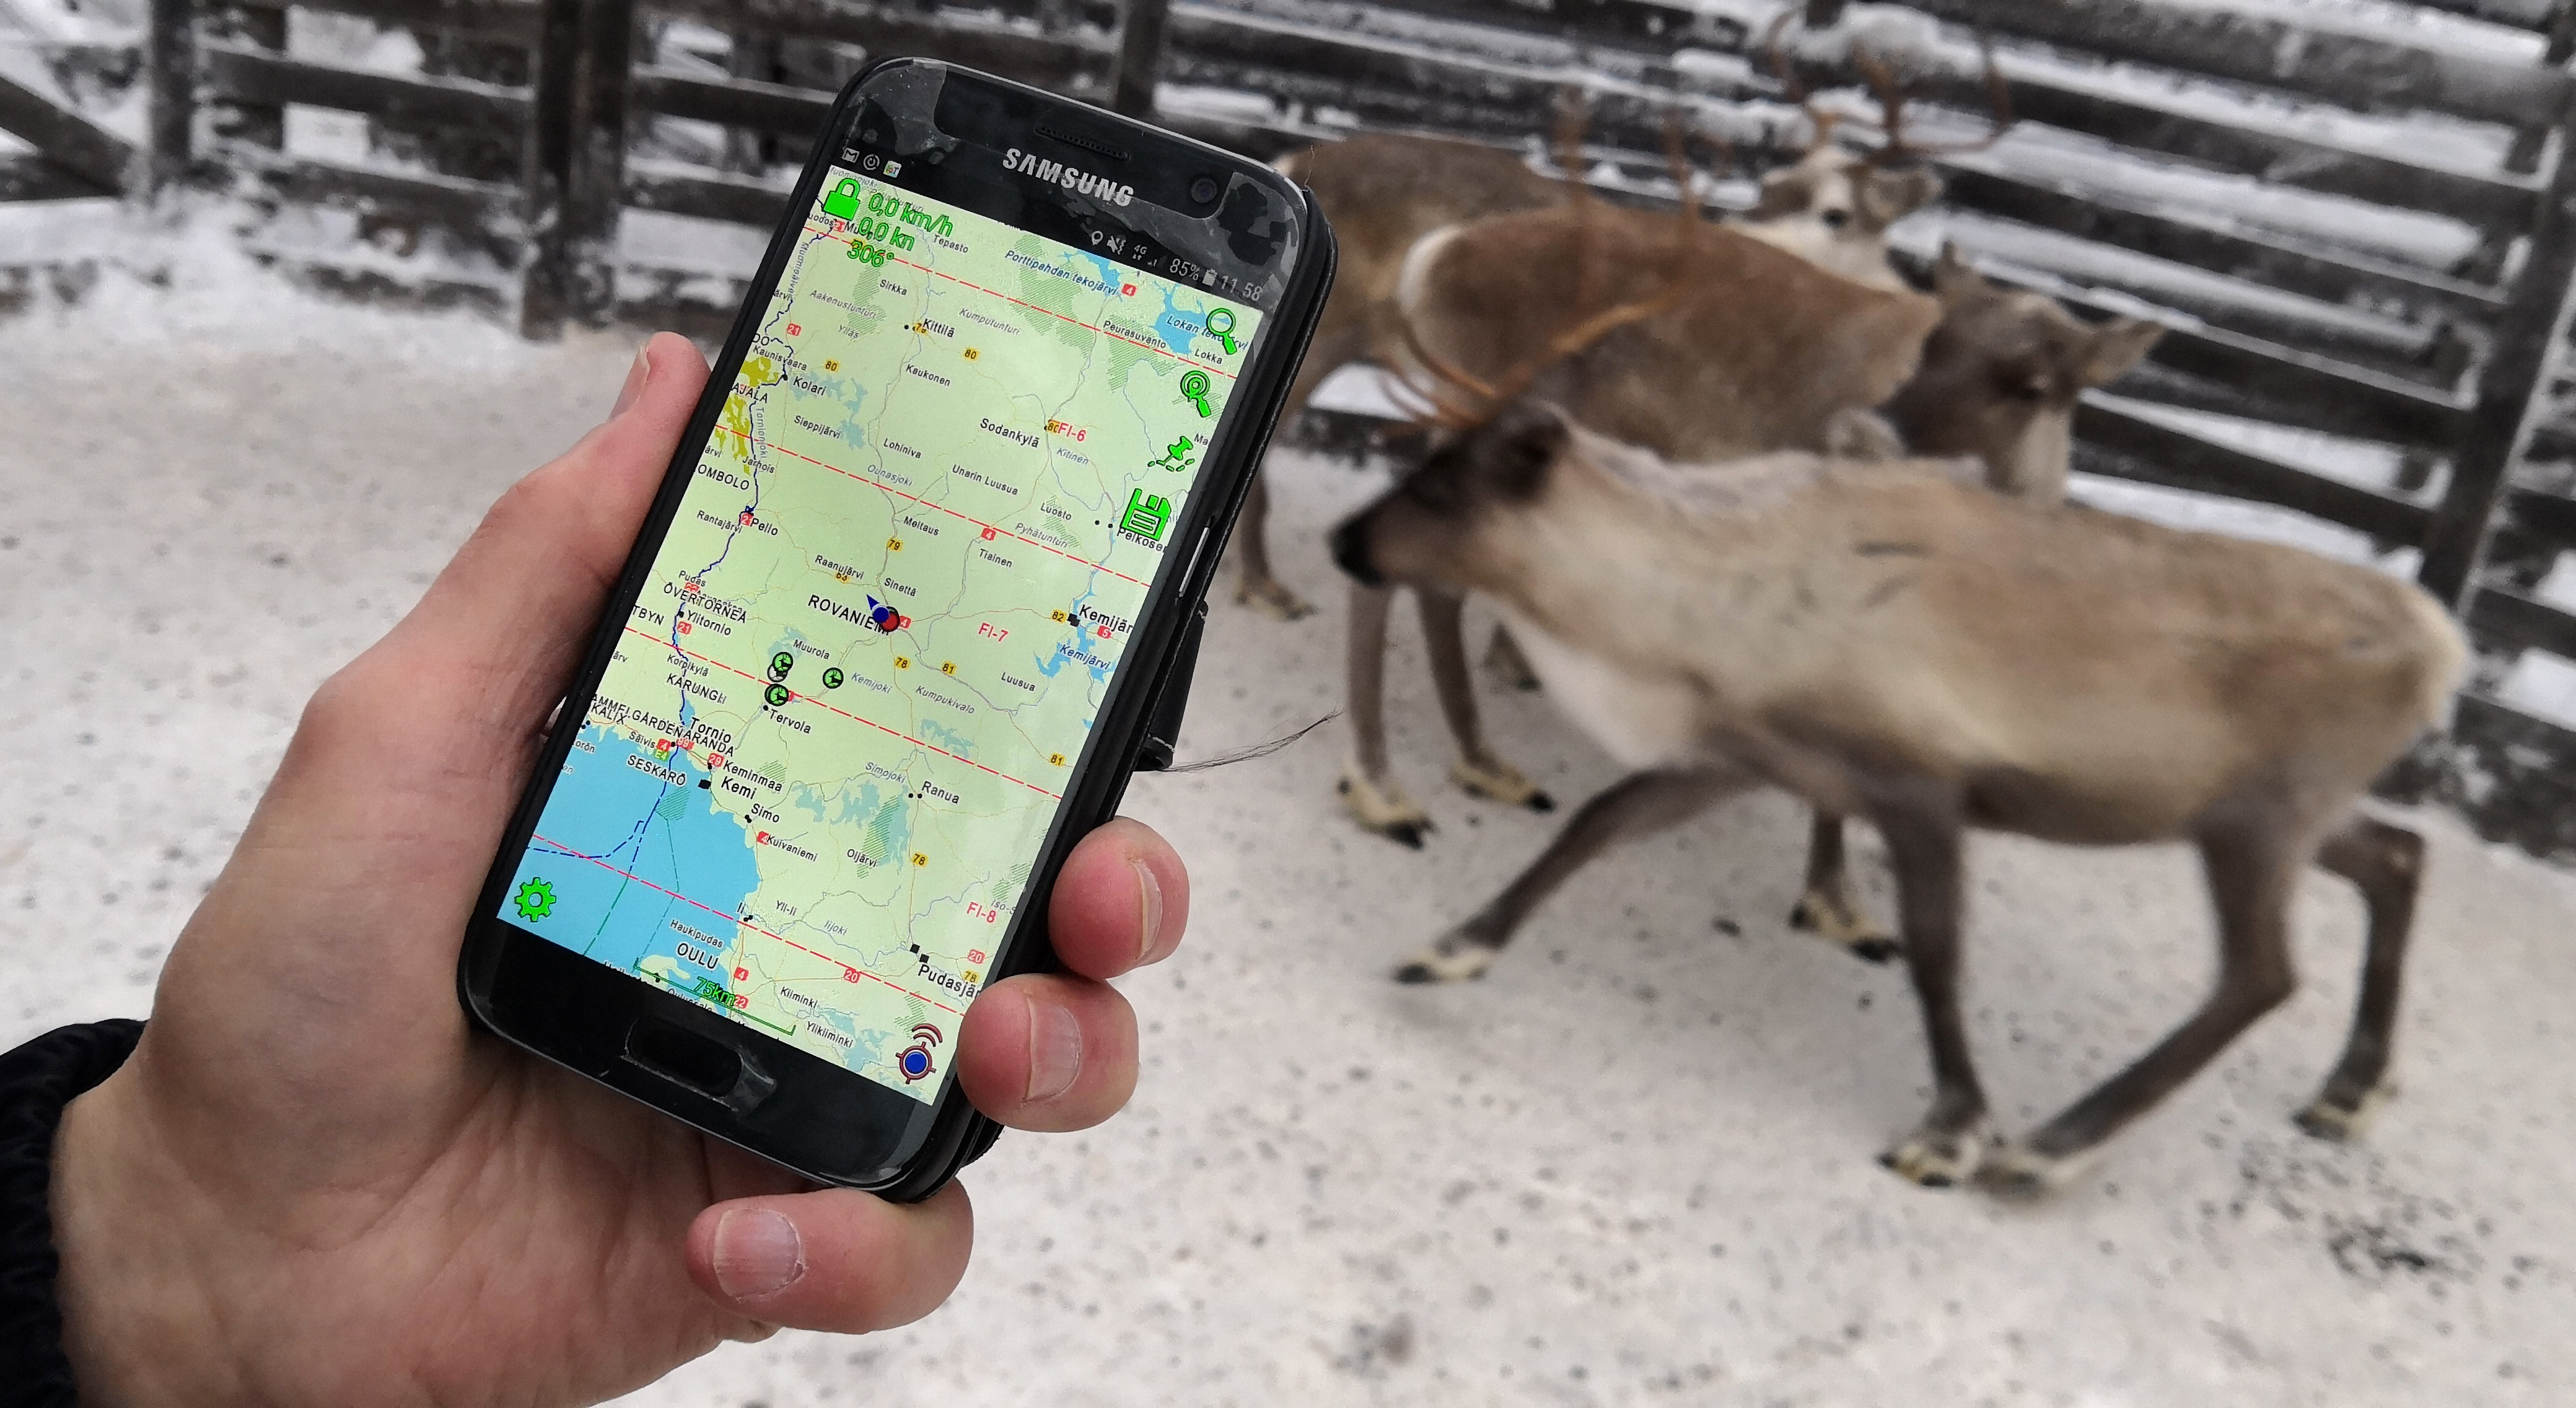 jammer gun works llc - Then One Foggy Christmas Eve, Reindeers Got Connected